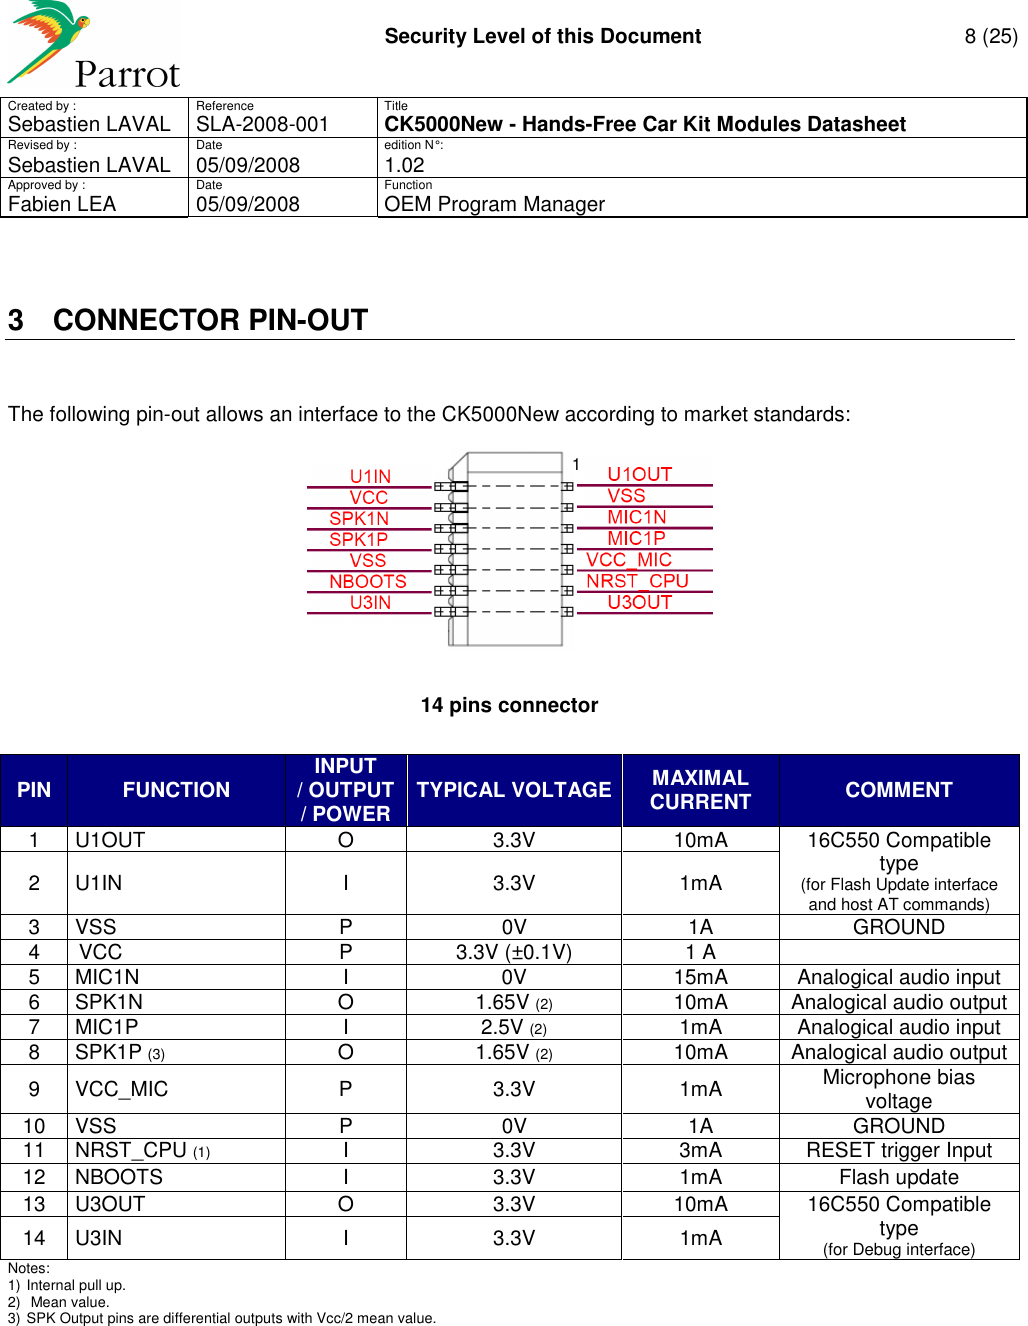     Security Level of this Document  8 (25) Created by :  Reference  Title Sebastien LAVAL   SLA-2008-001 CK5000New - Hands-Free Car Kit Modules Datasheet Revised by :  Date  edition N° : Sebastien LAVAL  05/09/2008  1.02 Approved by :  Date  Function     Fabien LEA  05/09/2008  OEM Program Manager   3  CONNECTOR PIN-OUT  The following pin-out allows an interface to the CK5000New according to market standards:        14 pins connector  PIN  FUNCTION INPUT / OUTPUT / POWER  TYPICAL VOLTAGE MAXIMAL CURRENT  COMMENT 1  U1OUT  O  3.3V  10mA  16C550 Compatible type (for Flash Update interface and host AT commands) 2  U1IN  I  3.3V  1mA 3  VSS   P  0V  1A  GROUND 4  VCC   P  3.3V (±0.1V)  1 A   5  MIC1N  I  0V  15mA  Analogical audio input 6  SPK1N   O  1.65V (2)  10mA  Analogical audio output 7  MIC1P   I  2.5V (2)  1mA  Analogical audio input 8  SPK1P (3)  O  1.65V (2)  10mA  Analogical audio output 9  VCC_MIC  P  3.3V  1mA  Microphone bias voltage 10  VSS   P  0V  1A  GROUND 11  NRST_CPU (1)  I  3.3V  3mA  RESET trigger Input 12  NBOOTS  I  3.3V  1mA  Flash update 13  U3OUT  O  3.3V  10mA  16C550 Compatible type  (for Debug interface) 14  U3IN  I  3.3V  1mA Notes:   1) Internal pull up. 2)  Mean value. 3) SPK Output pins are differential outputs with Vcc/2 mean value.  1 